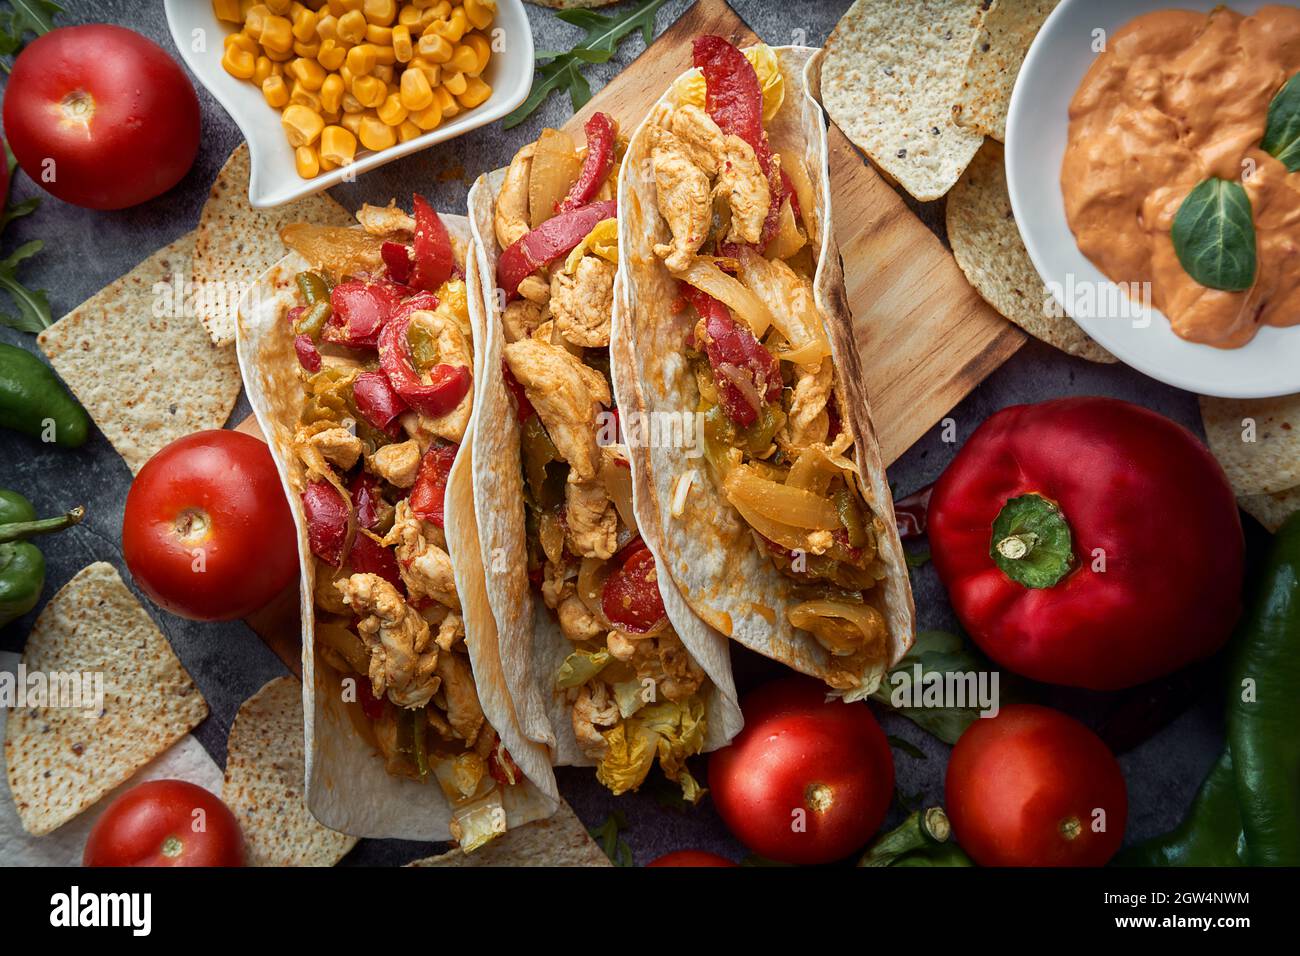 Still Life Of Three Fajitas Or Mexican Tacos With Meat, Pepper, Tomato, Spicy Pepper And Nachos. Stock Photo